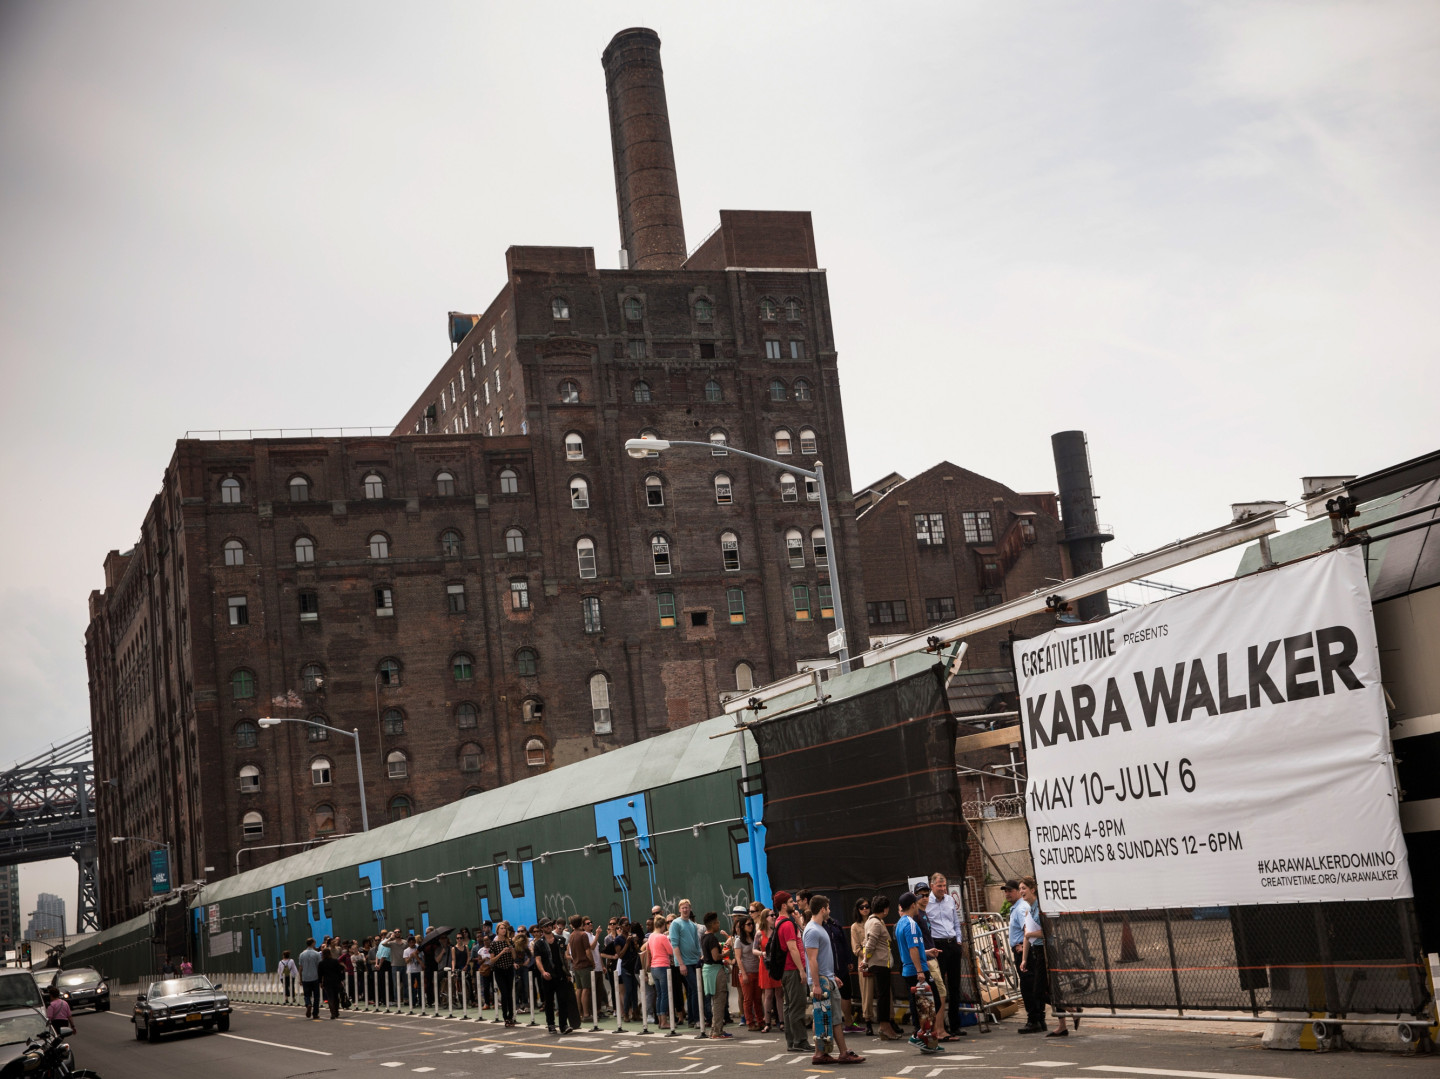 Visitors wait in line for the Kara Walker exhibit on May 10, opening day. The show was housed in a former Domino Sugar refinery. Inside, visitors described the building as "cathedral-like" and "creepy," and said it smelled like a bakery